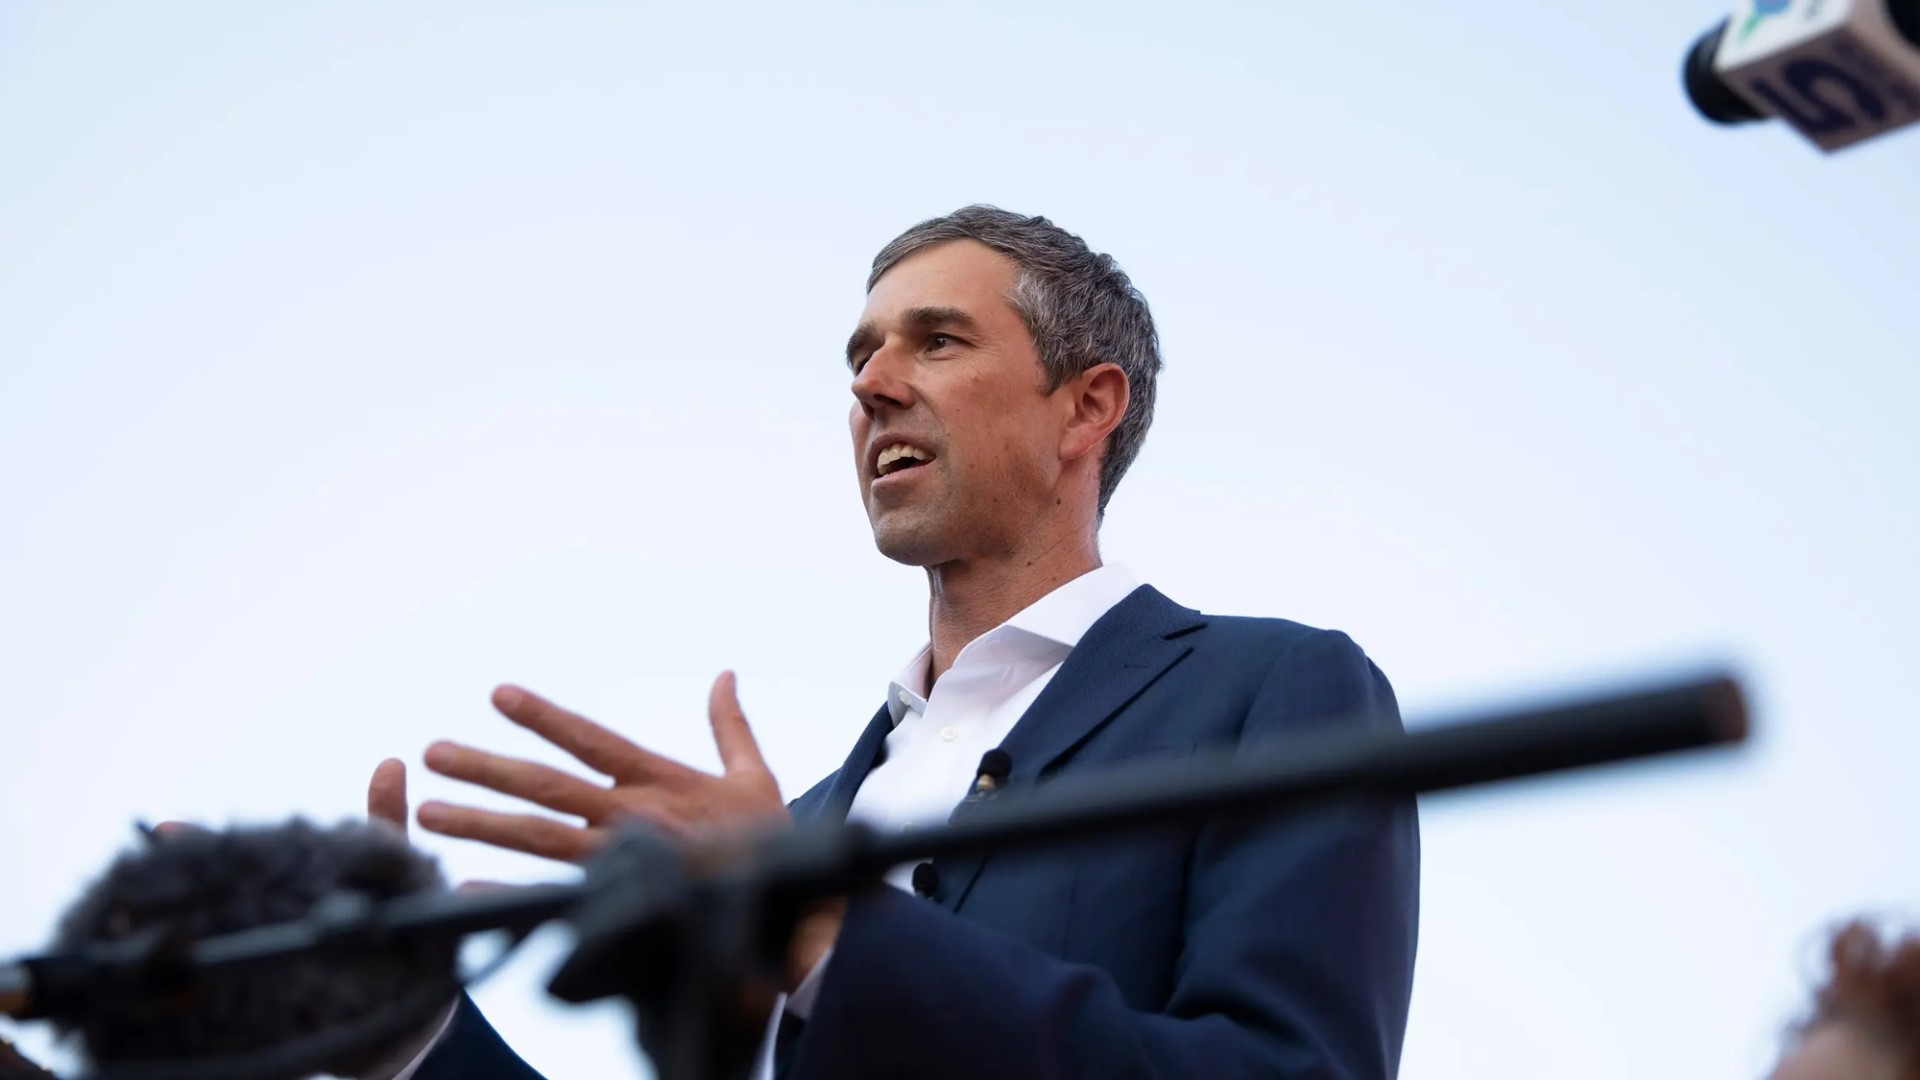 In his statement Sunday, O' Rourke thanked the doctors and nurses of Methodist Hospital in San Antonio where he said he was treated for the infection.